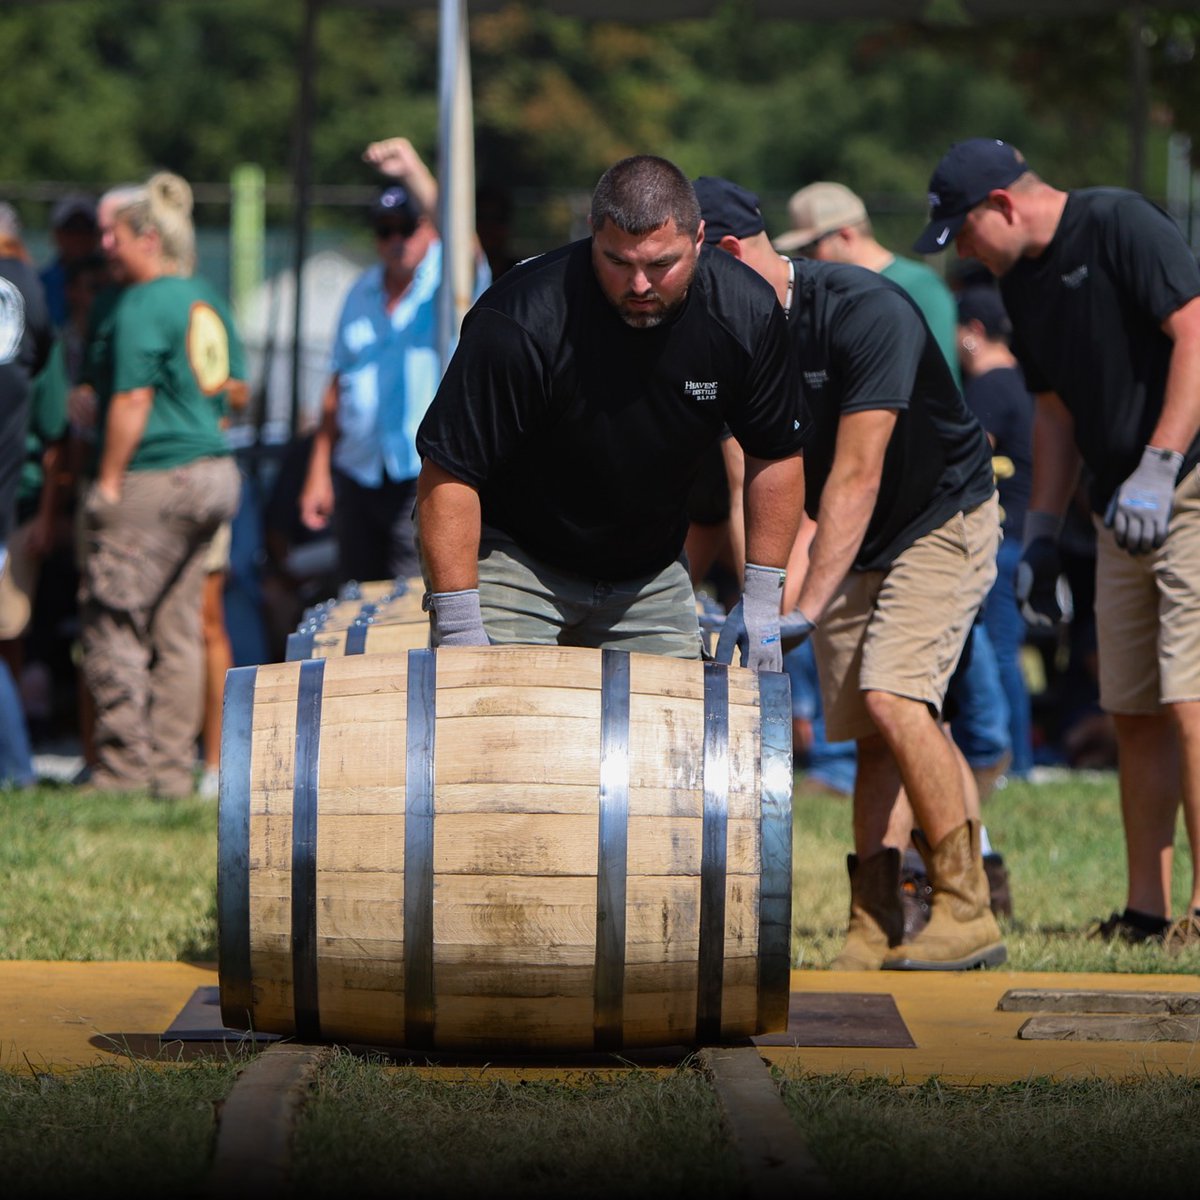 Congratulations to our men’s and women’s teams for their performance in the 2023 World Championship Bourbon Barrel Relay! The men’s team took first place and the women’s took second in their events.